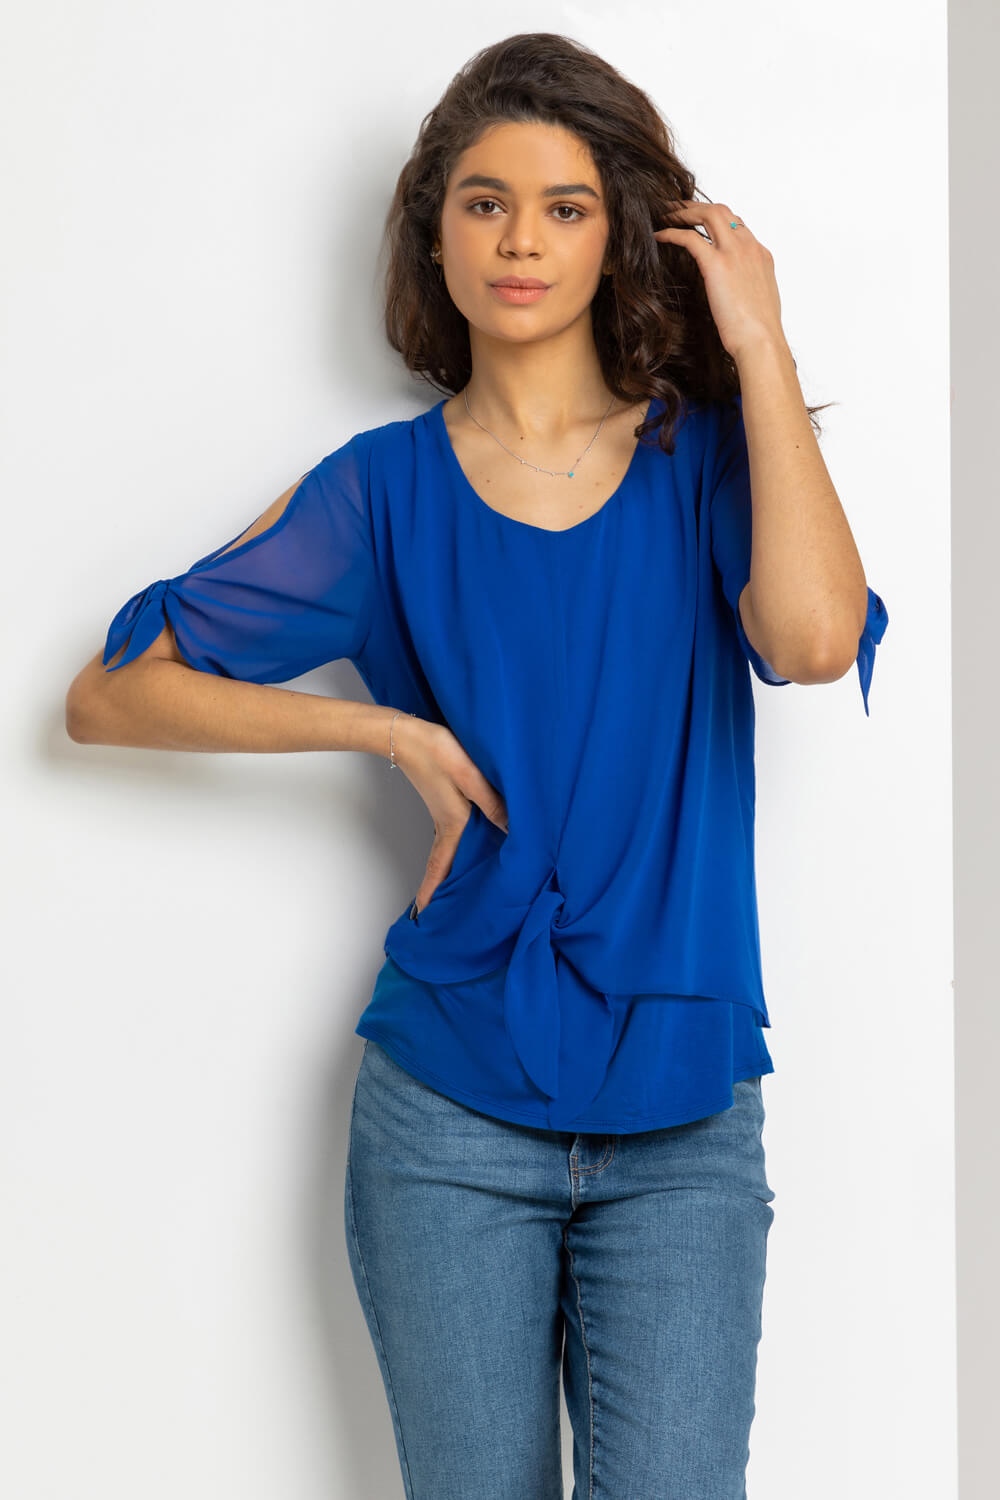 Royal Blue Chiffon Layered Tie Front Top, Image 4 of 4